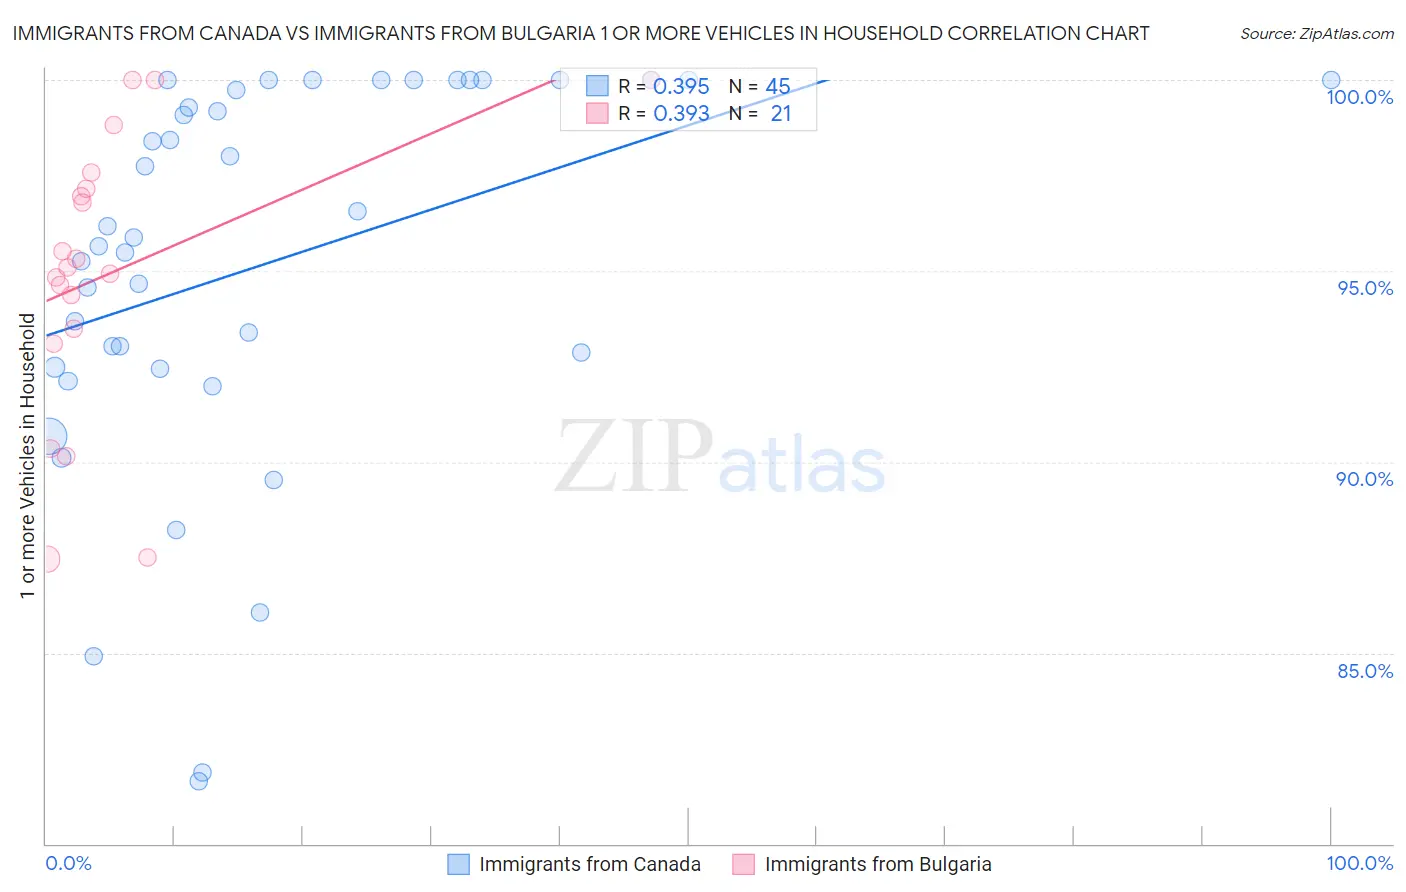 Immigrants from Canada vs Immigrants from Bulgaria 1 or more Vehicles in Household